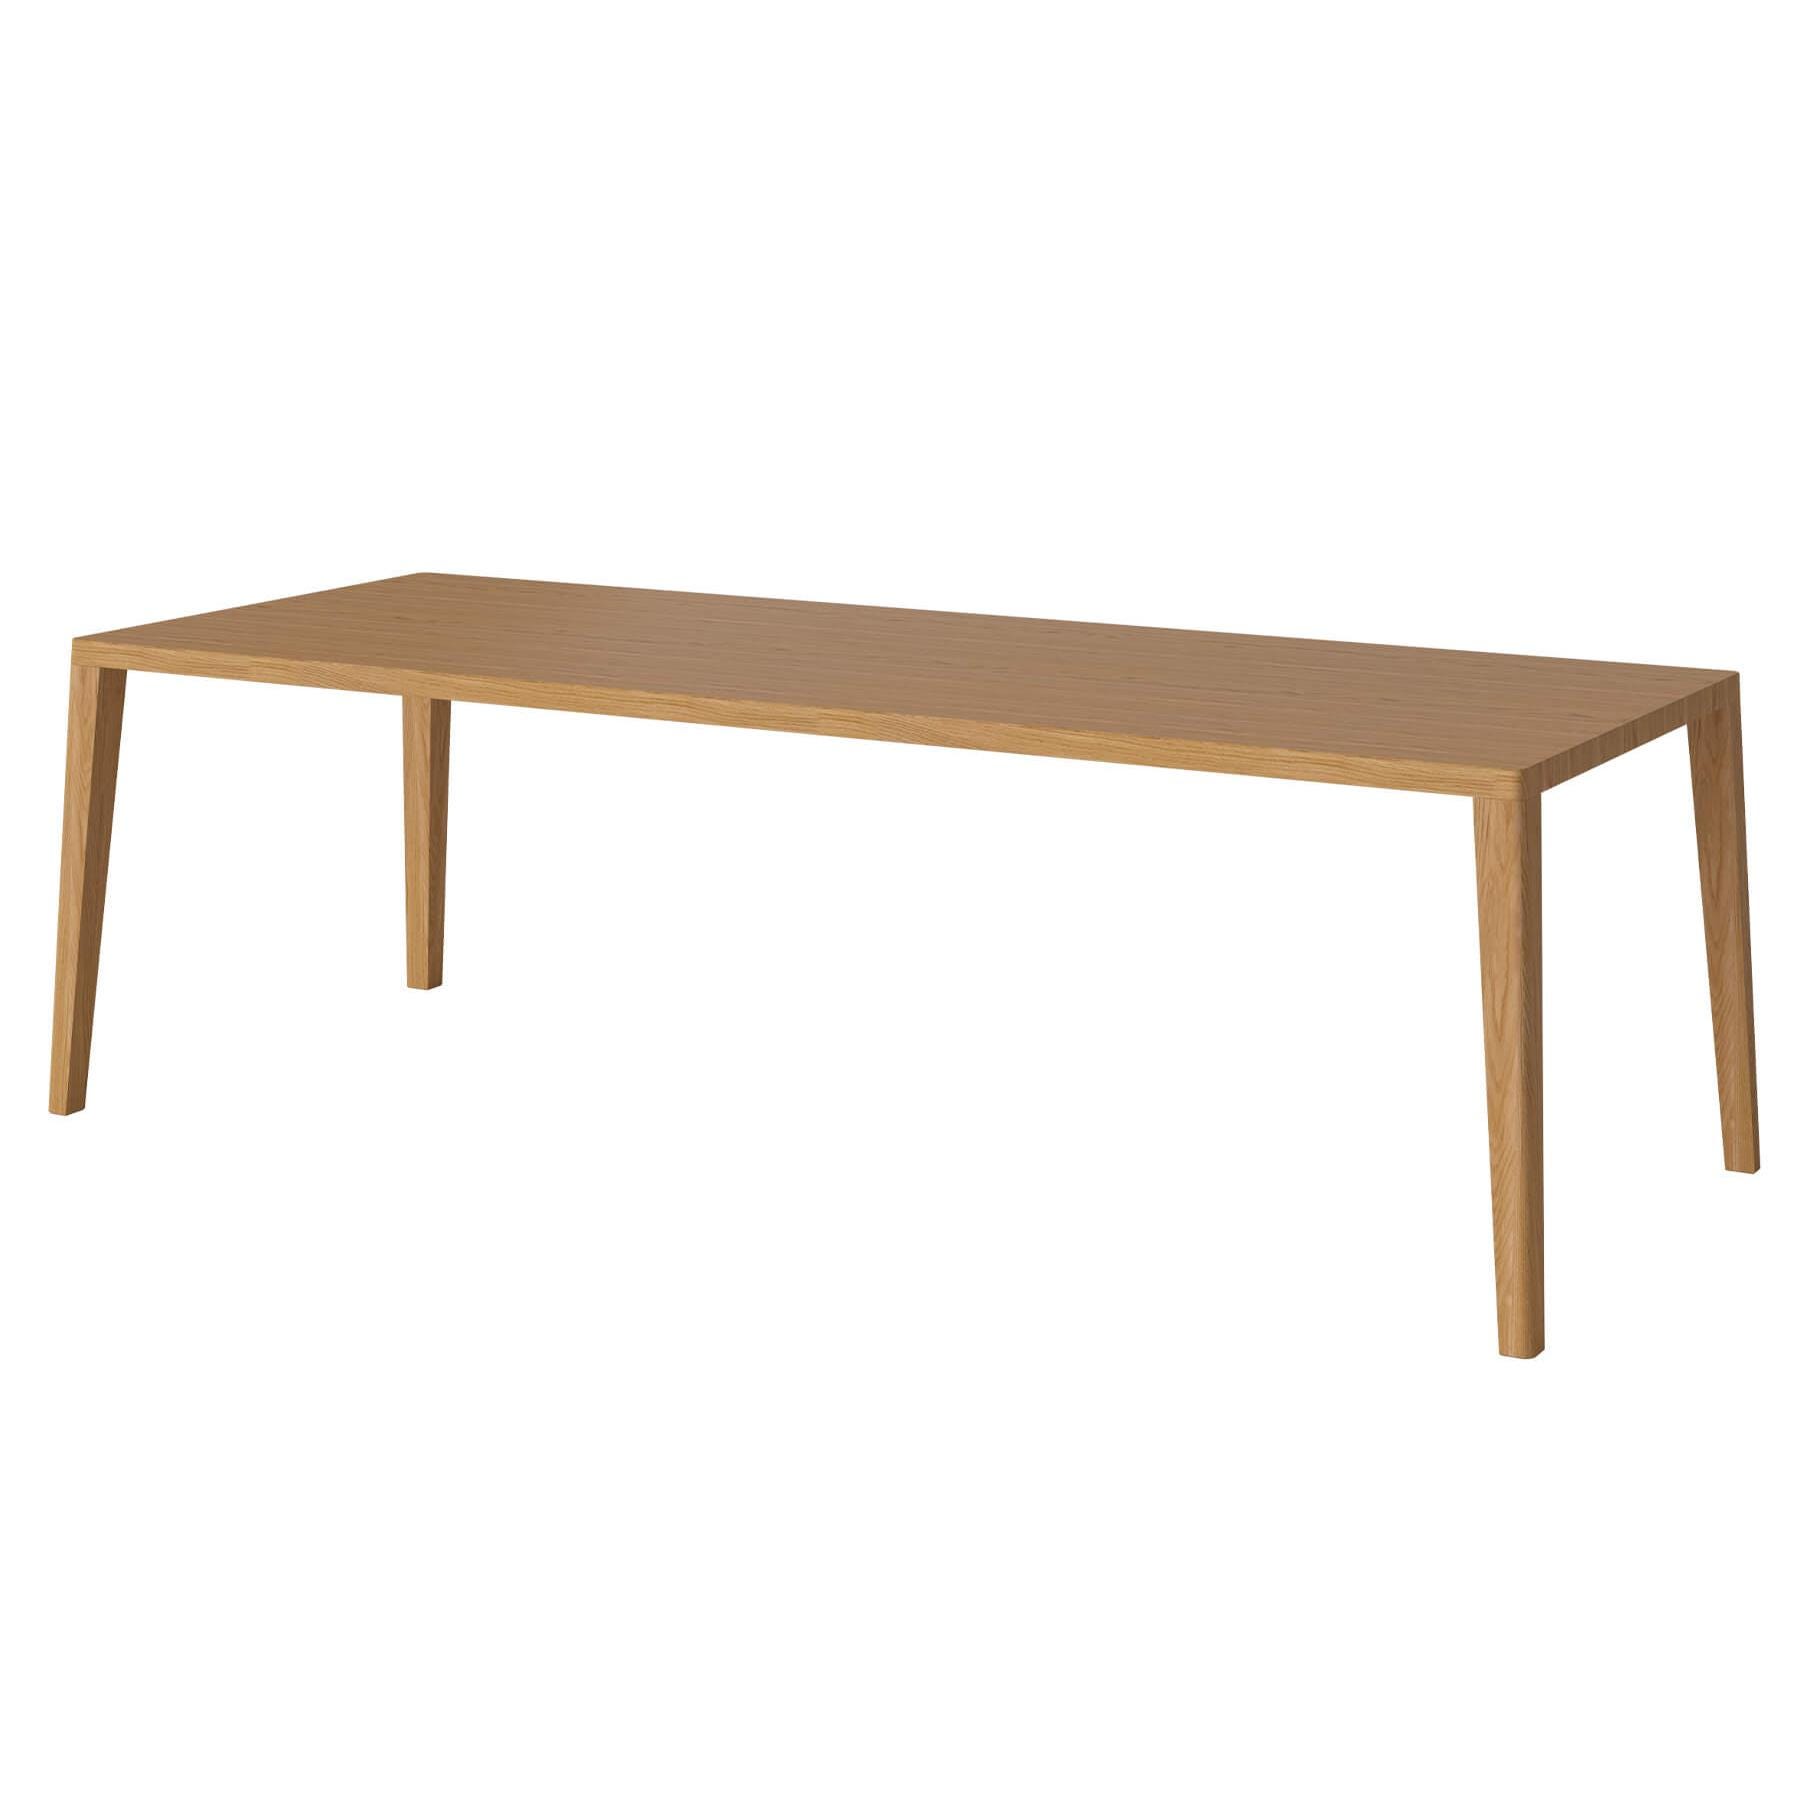 Bolia Graceful Dining Table 240 X 95cm Oiled Legs With Extension Leaves Light Wood Designer Furniture From Holloways Of Ludlow